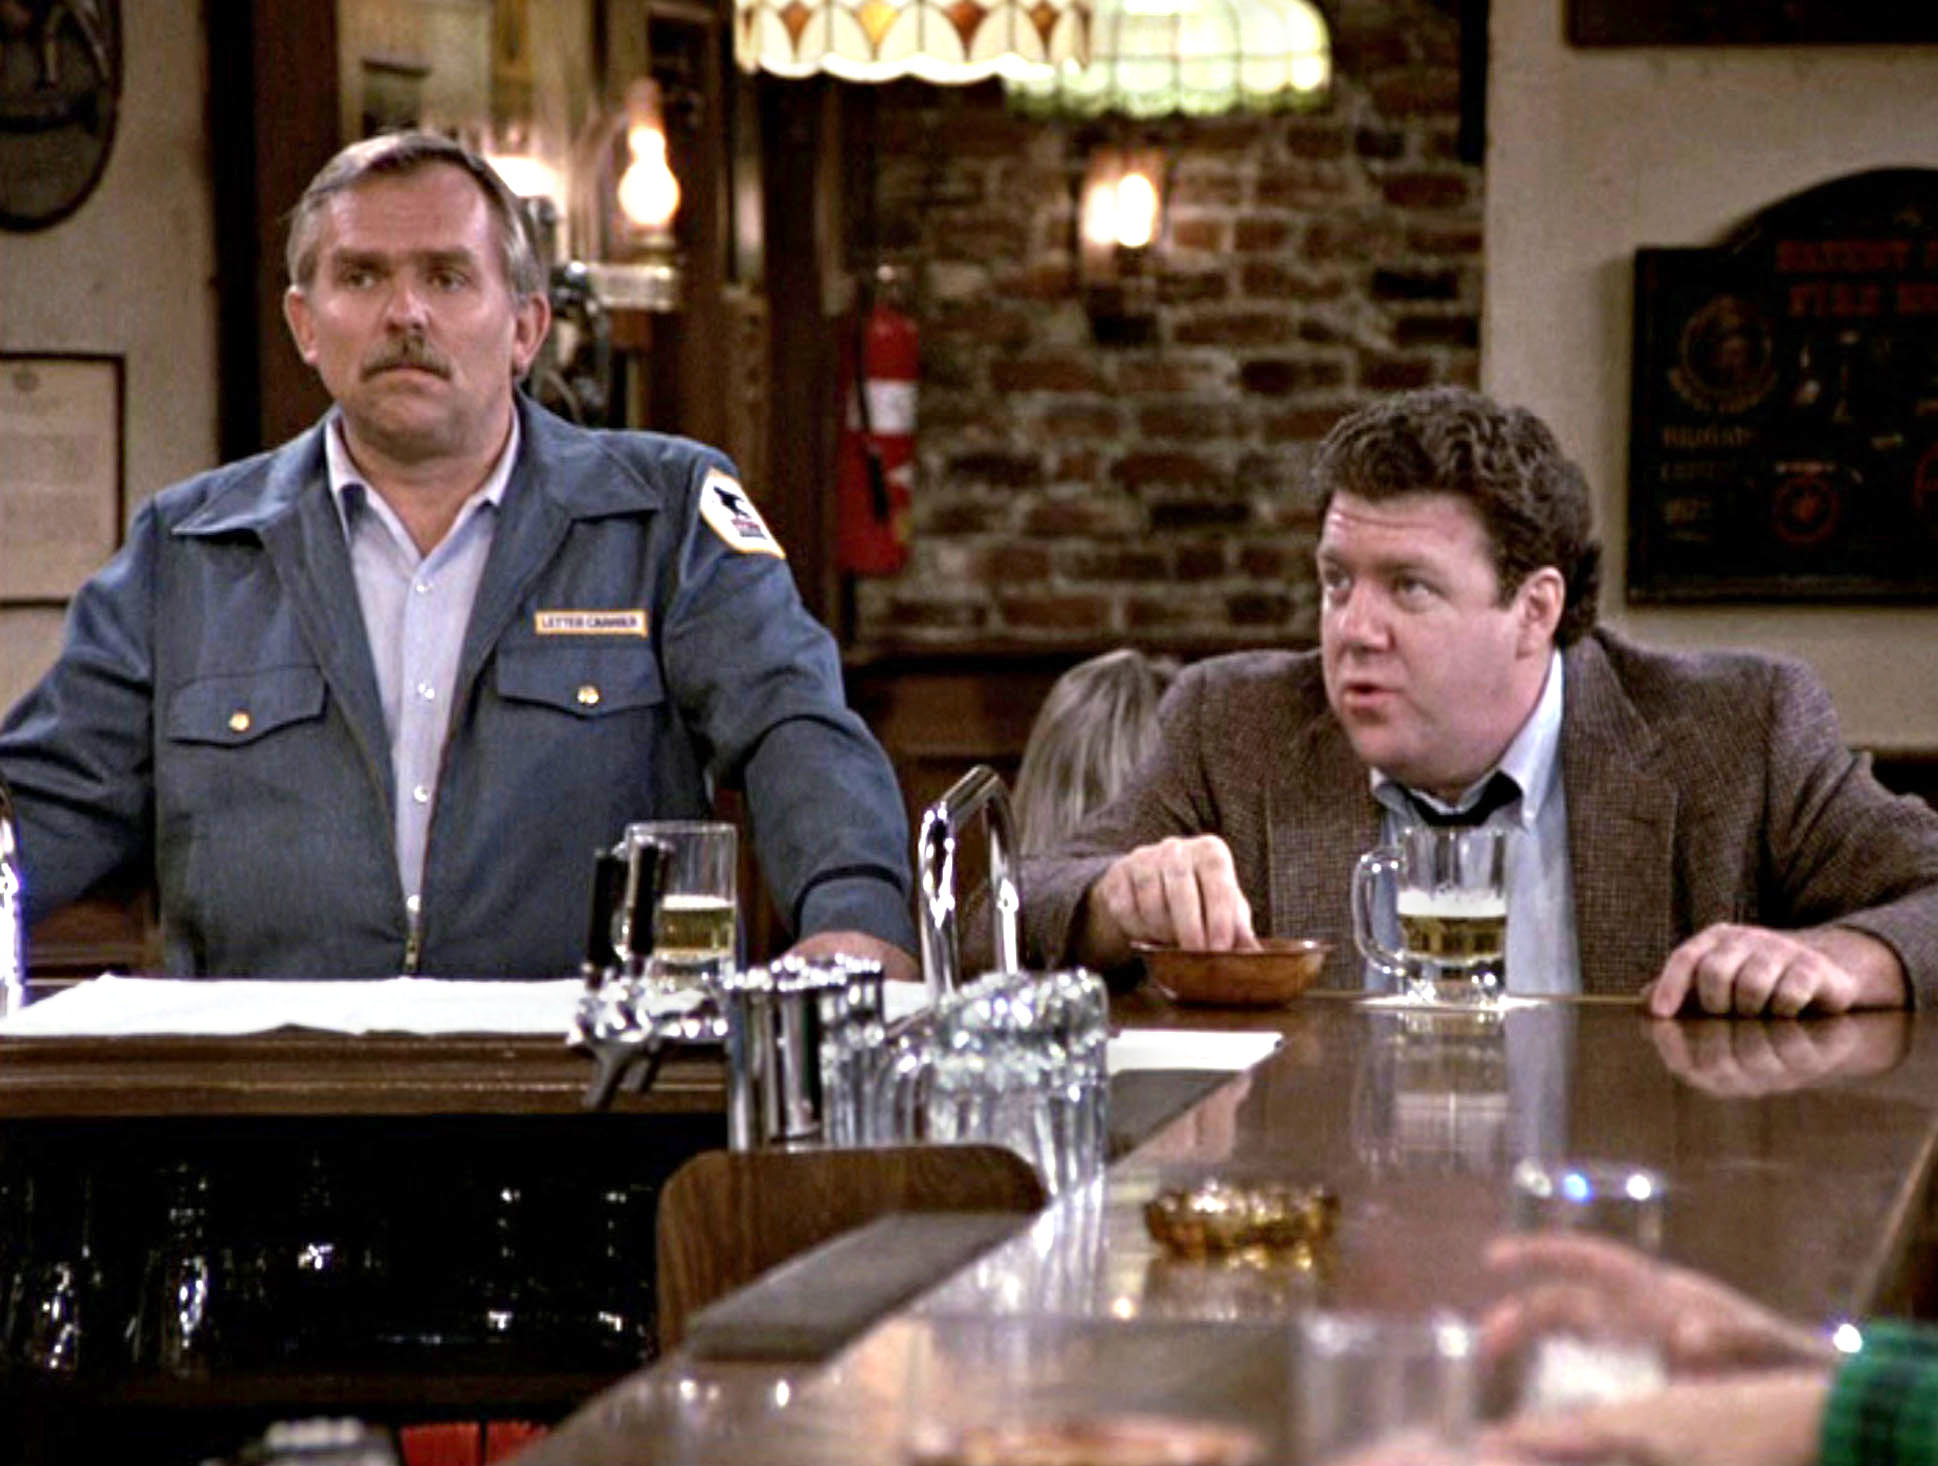 John Ratzenberger as Cliff Clavin and George Wendt as Norm Peterson in the &quot;Cheers&quot; episode &#x27;A Bar is Born,&#x27;